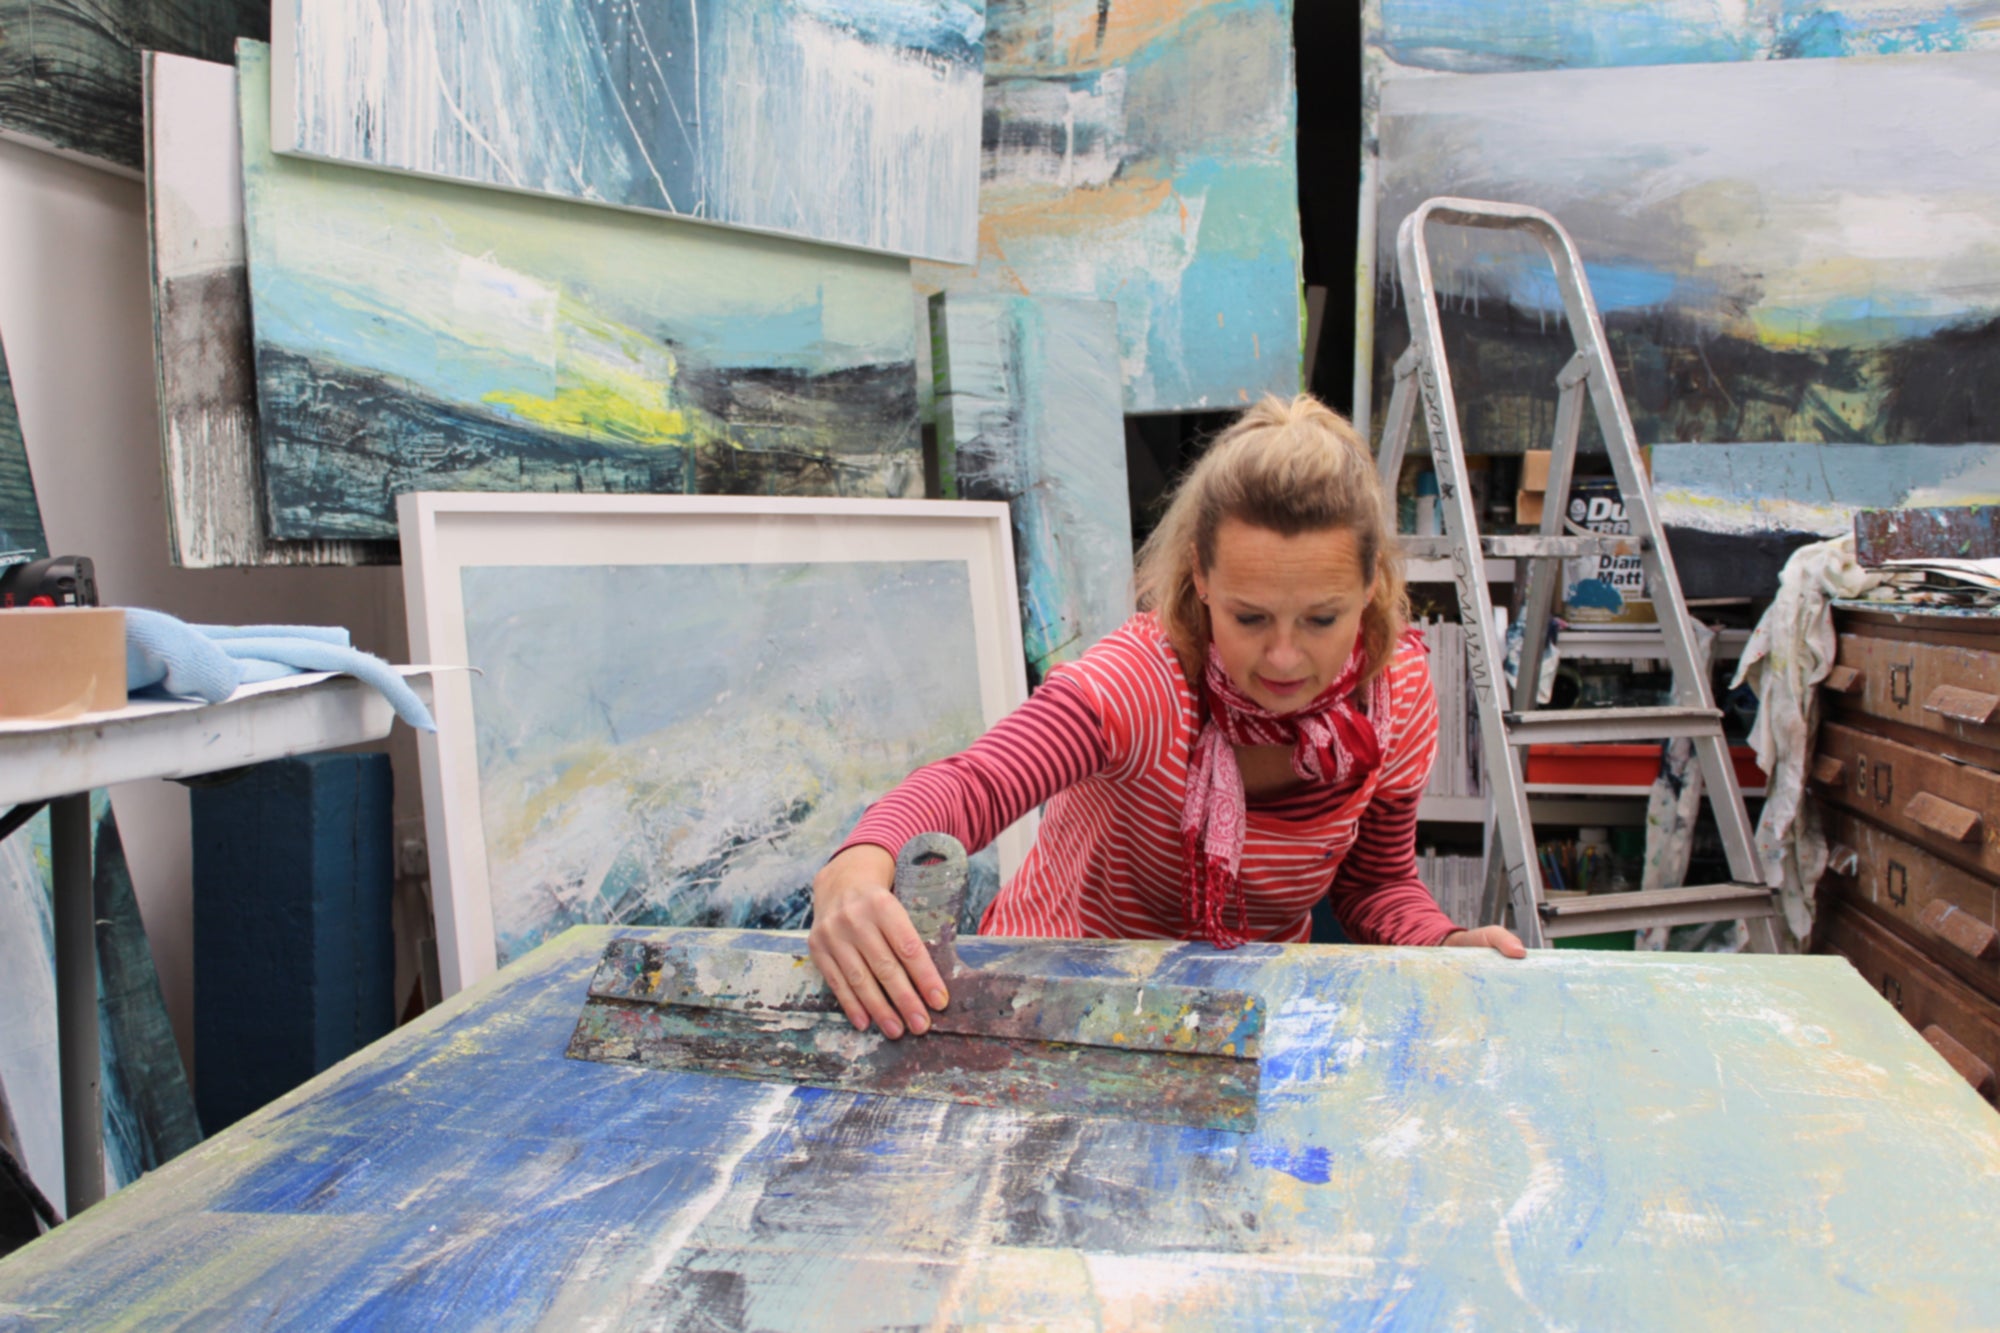 Justine Lois Thorpe in action at her studio